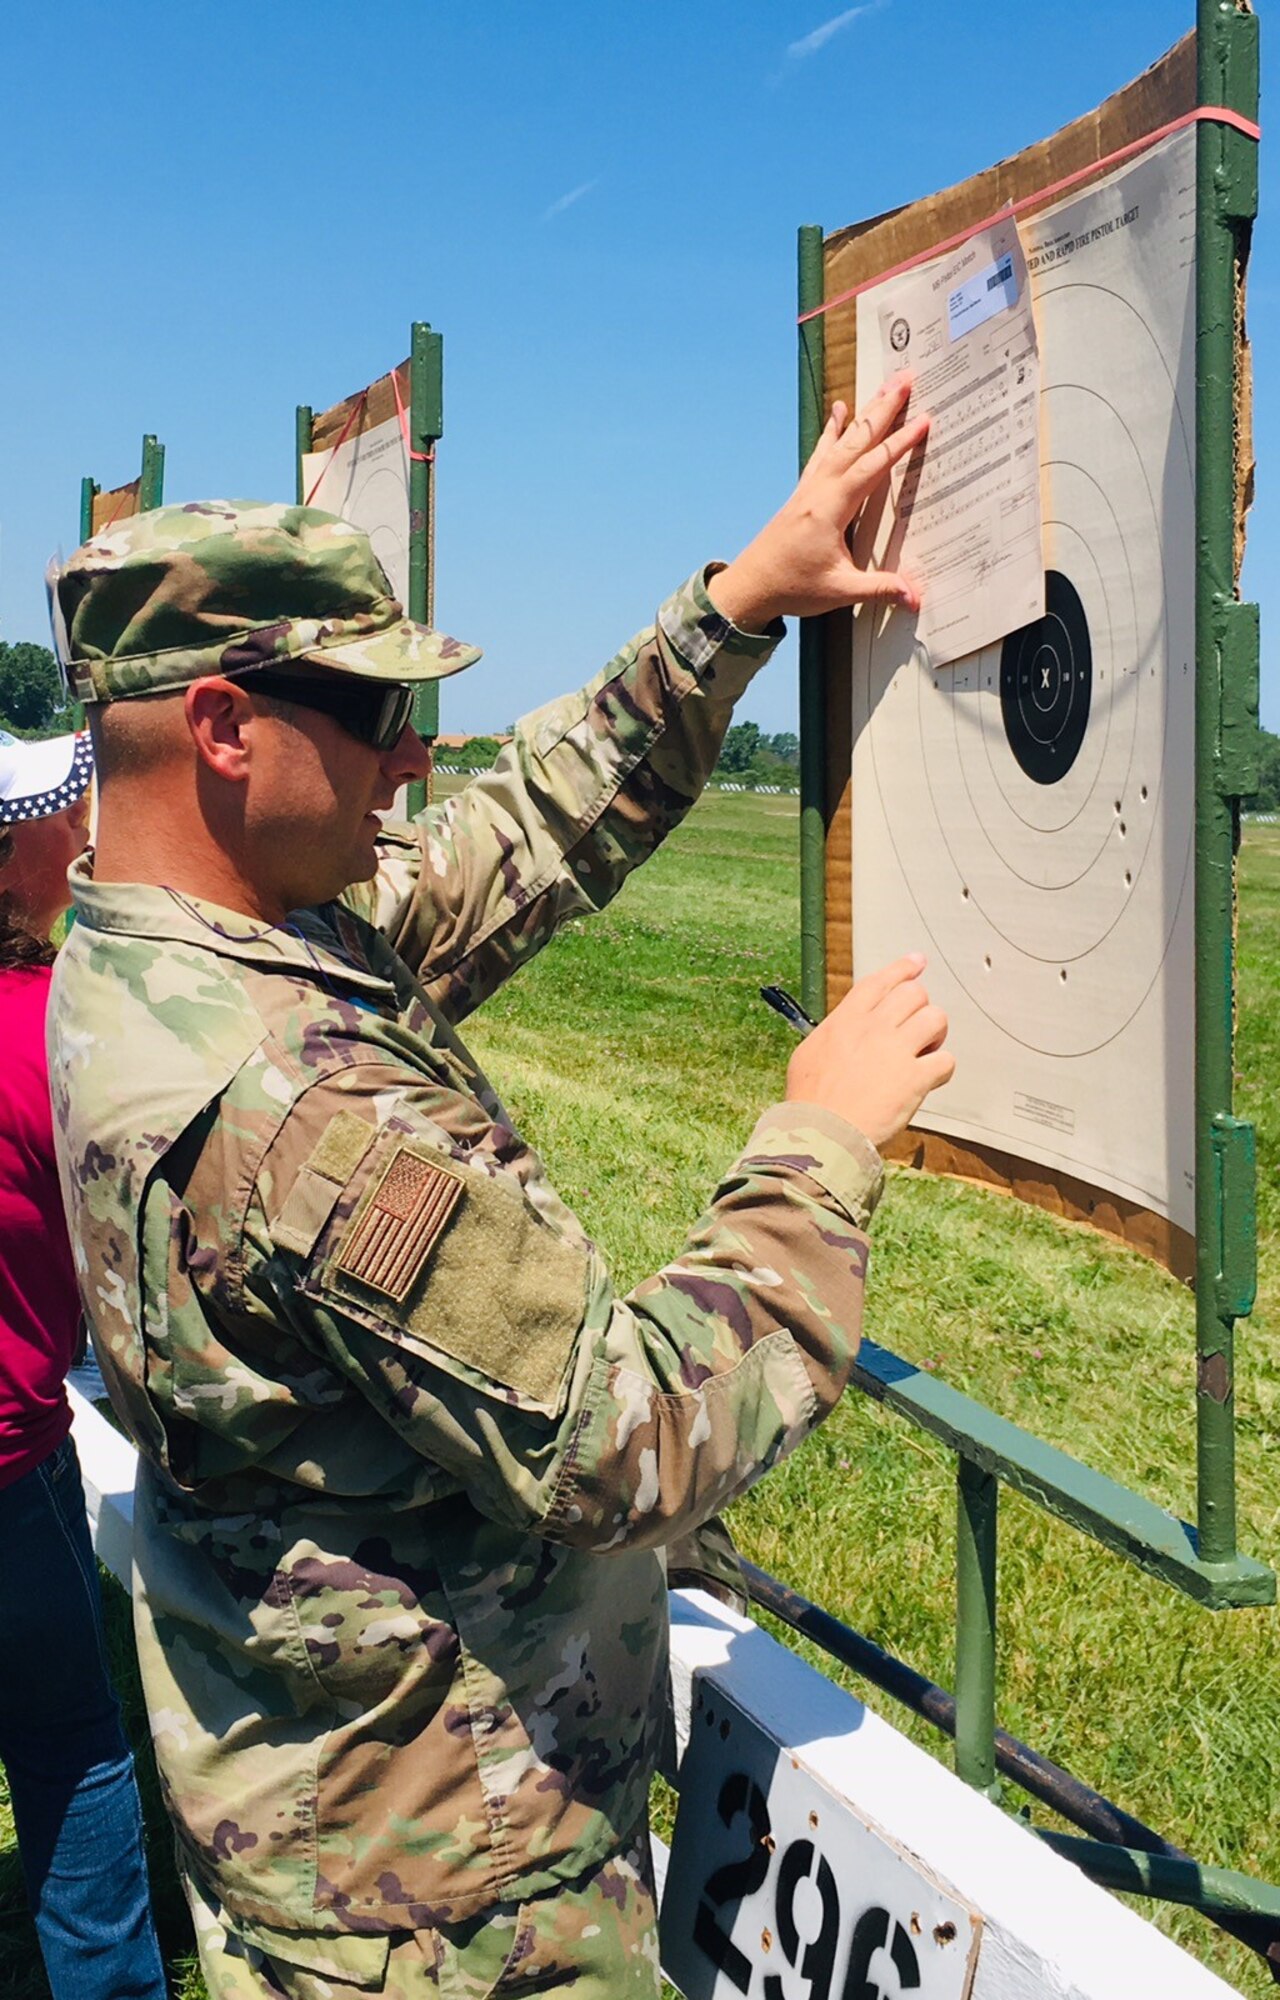 Lt. Col. Jason Harris looks at his target during the National Matches at Camp Perry, July 2019. The month-long national shooting festival hosts more than 6,000 military and civilian participants who train and compete in a variety of competition including traditional pistol, smallbore, high-power rifle and long-range rifle.